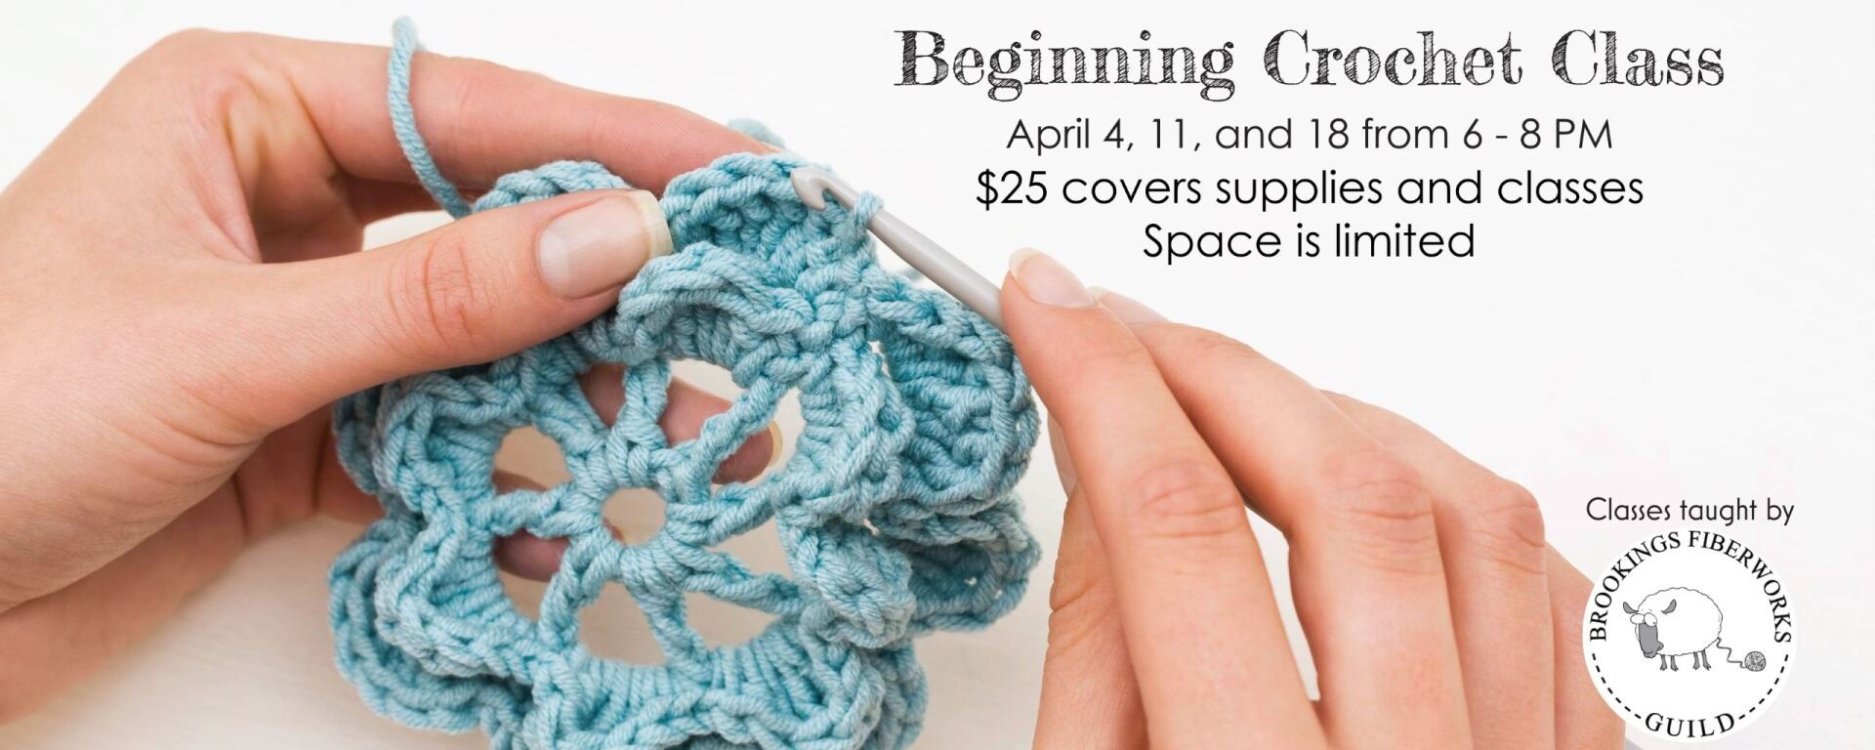 Beginning Crochet Classes - April 4, 11, and 18 from 6-8 PM.  $25 covers supplies and three nights of classes.  Space is limited.  Class taught by the Brookings Fiberworks Guild.